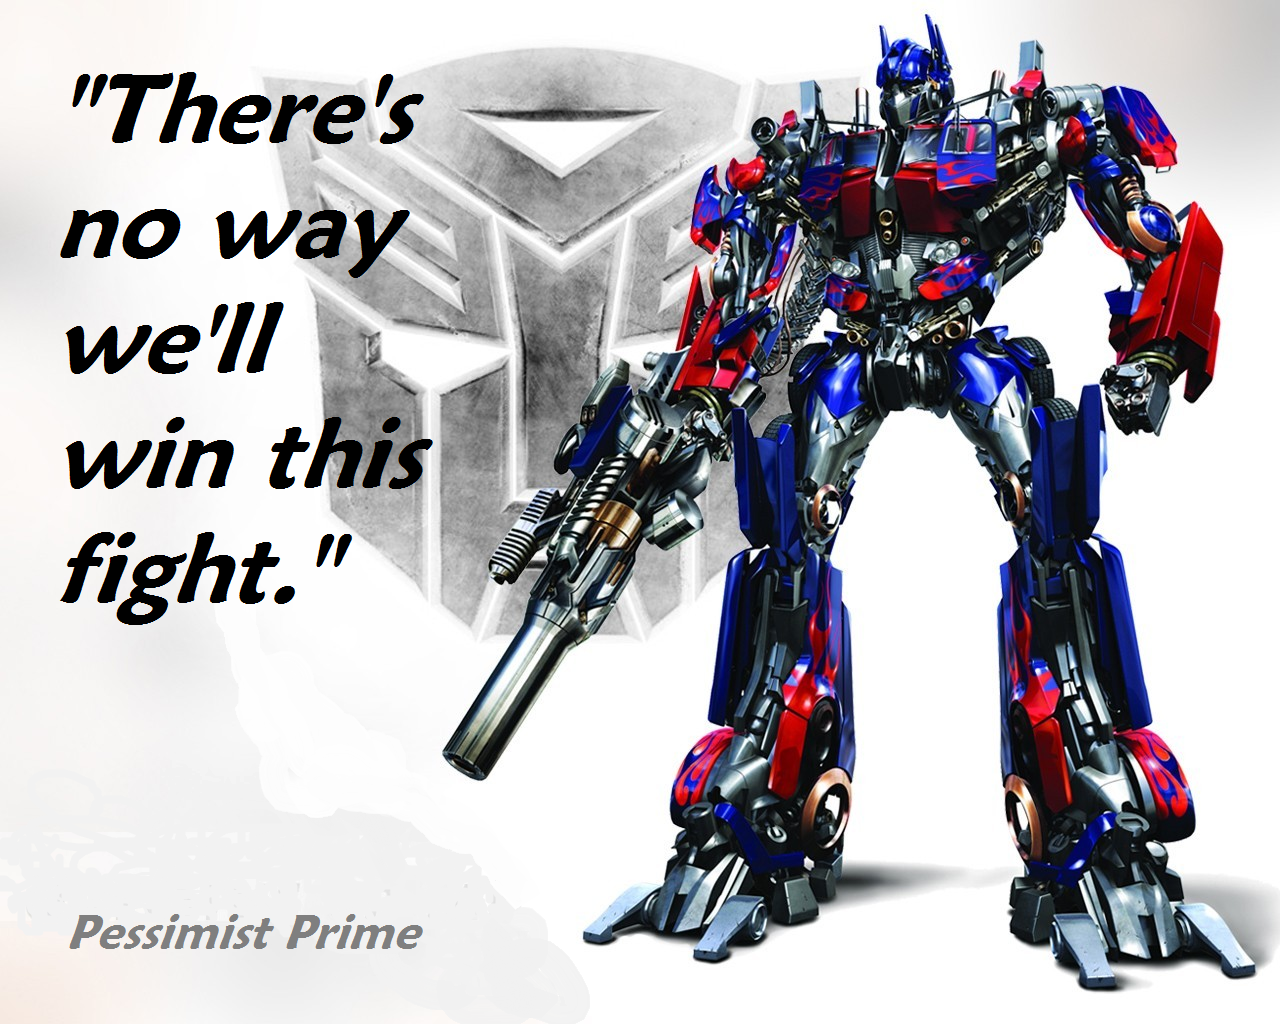 Pessimist-Prime-has-no-hope-for-his-team-transformers-31437435-1280-1024.png